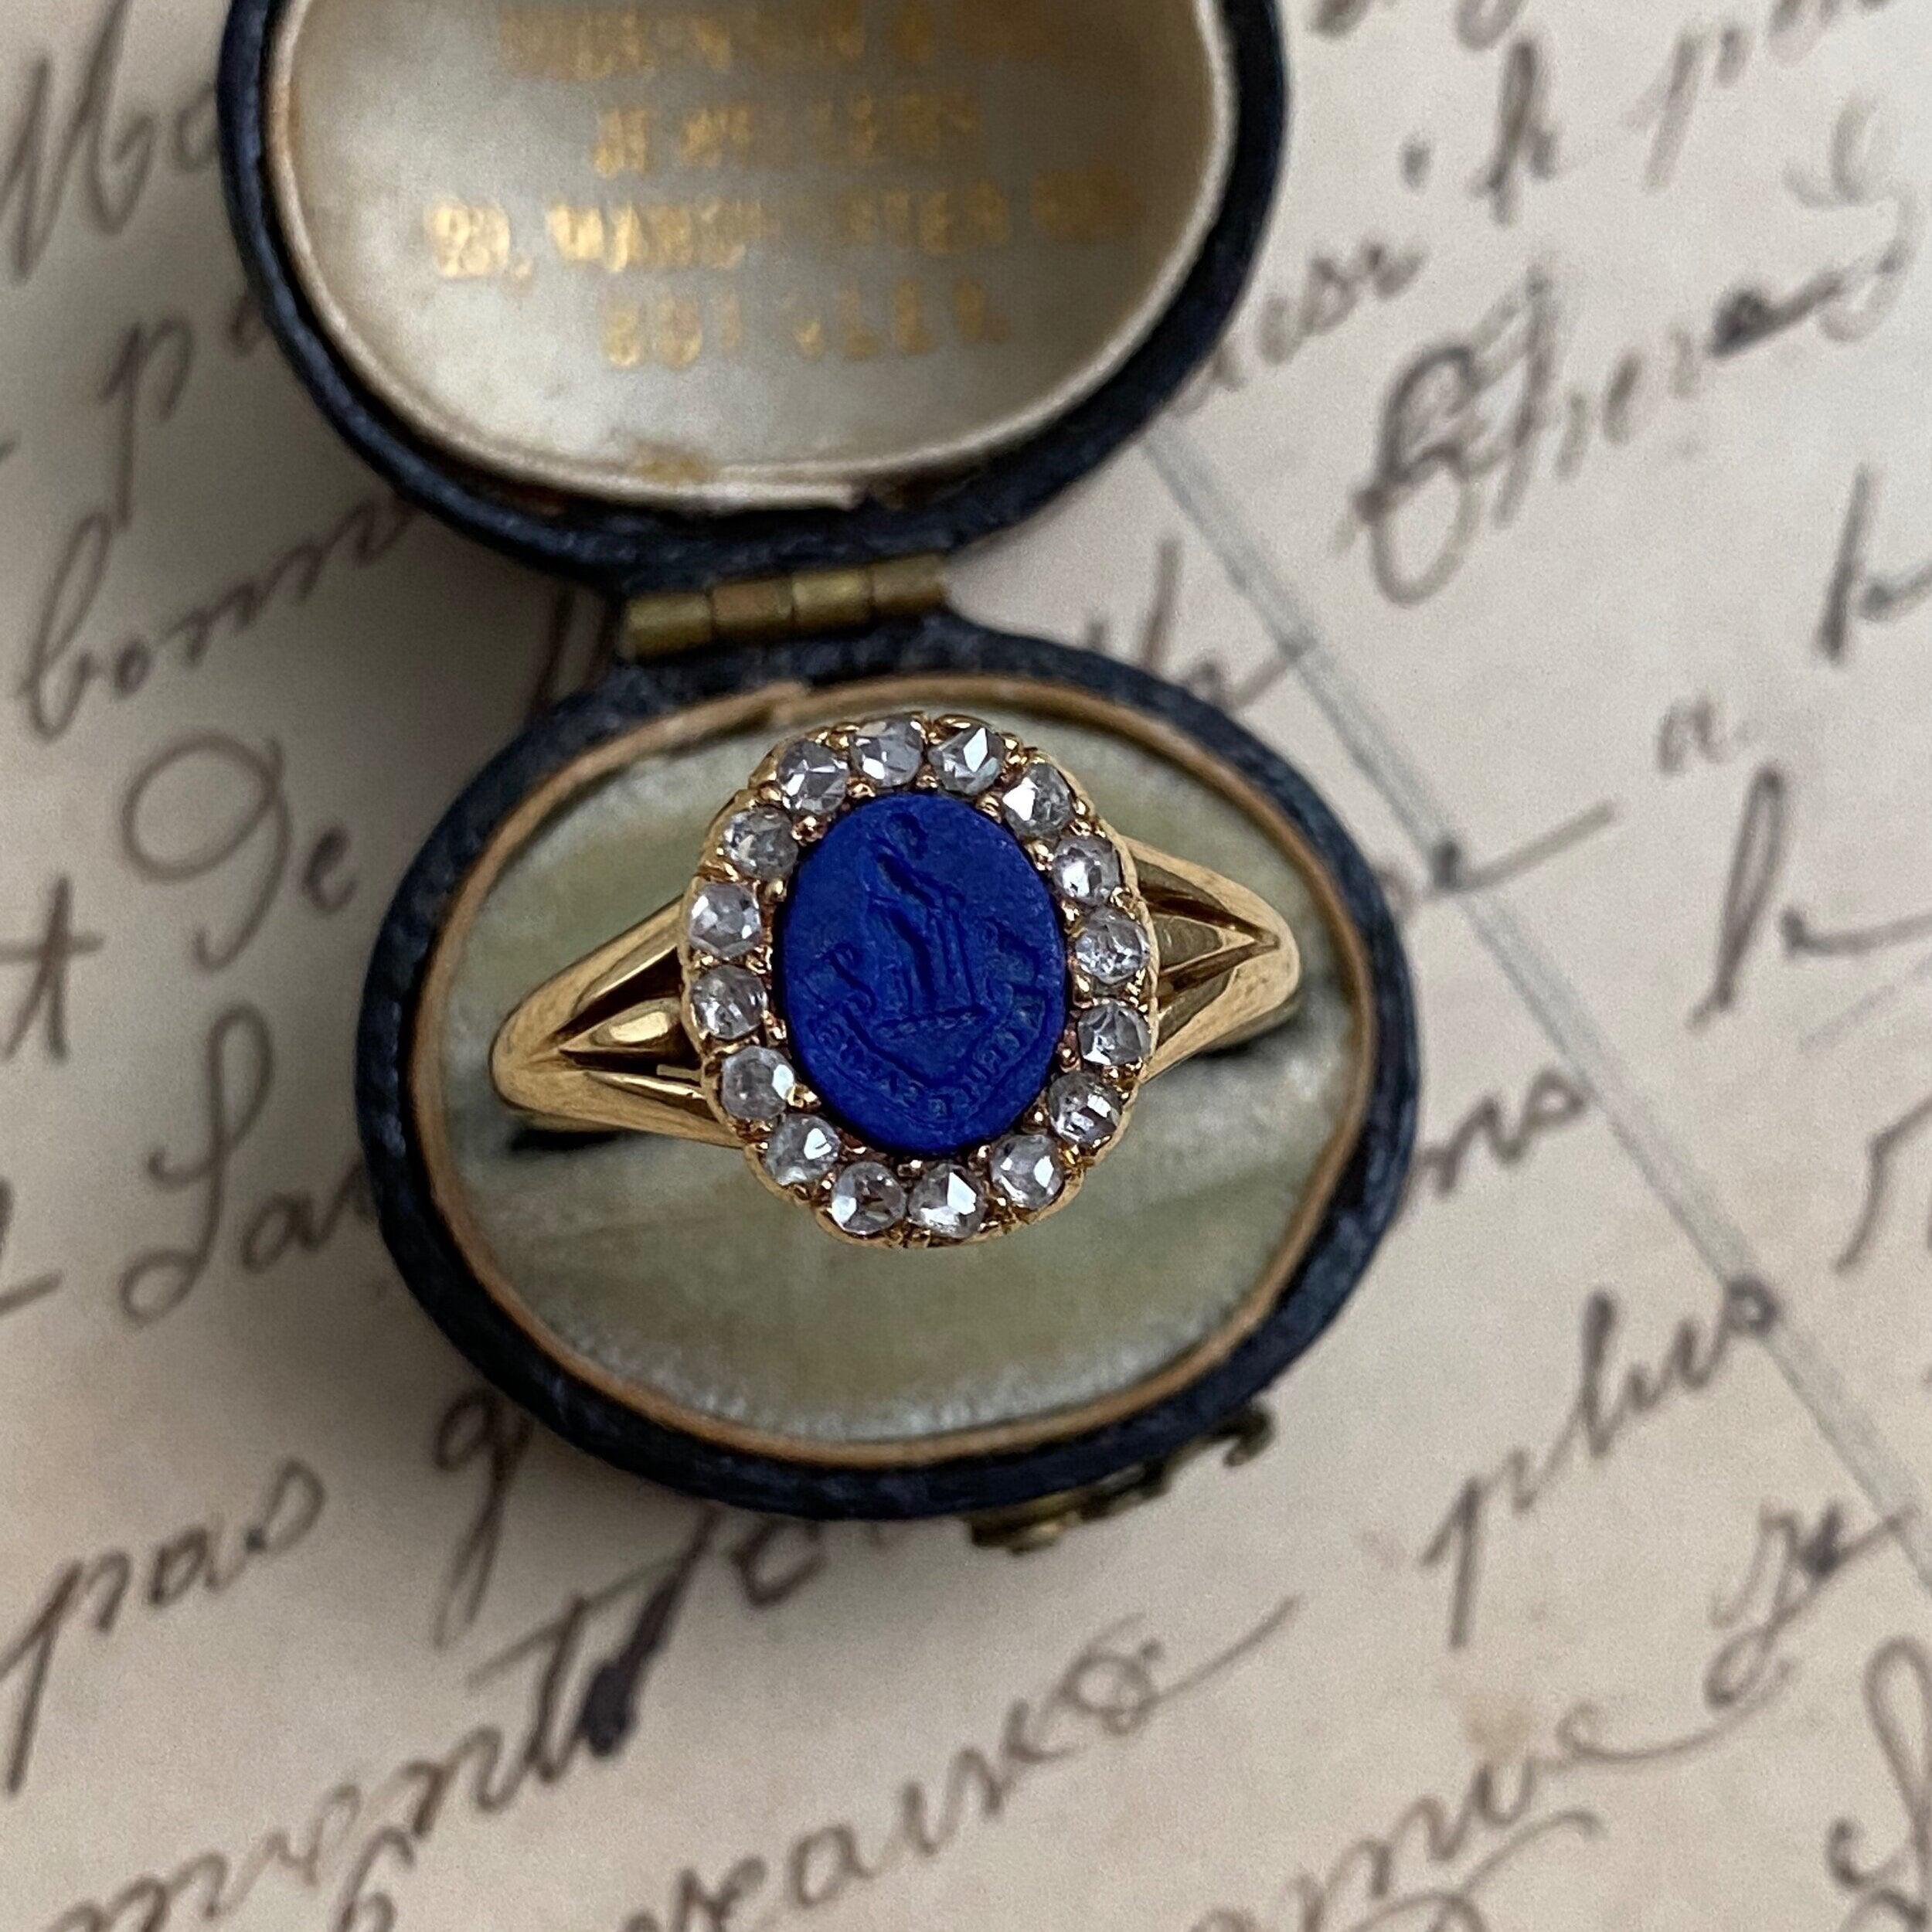 18K Lapis Intaglio Ring with Rose Cut Diamond Surround
“A Cruce Salus” “From the Cross Comes Salvation”

Size: 7

Measurements: 11.4 mm north to south

Weight: 3.3 grams

Notes: The antique box shown is for photography purposes. All jewelry will be